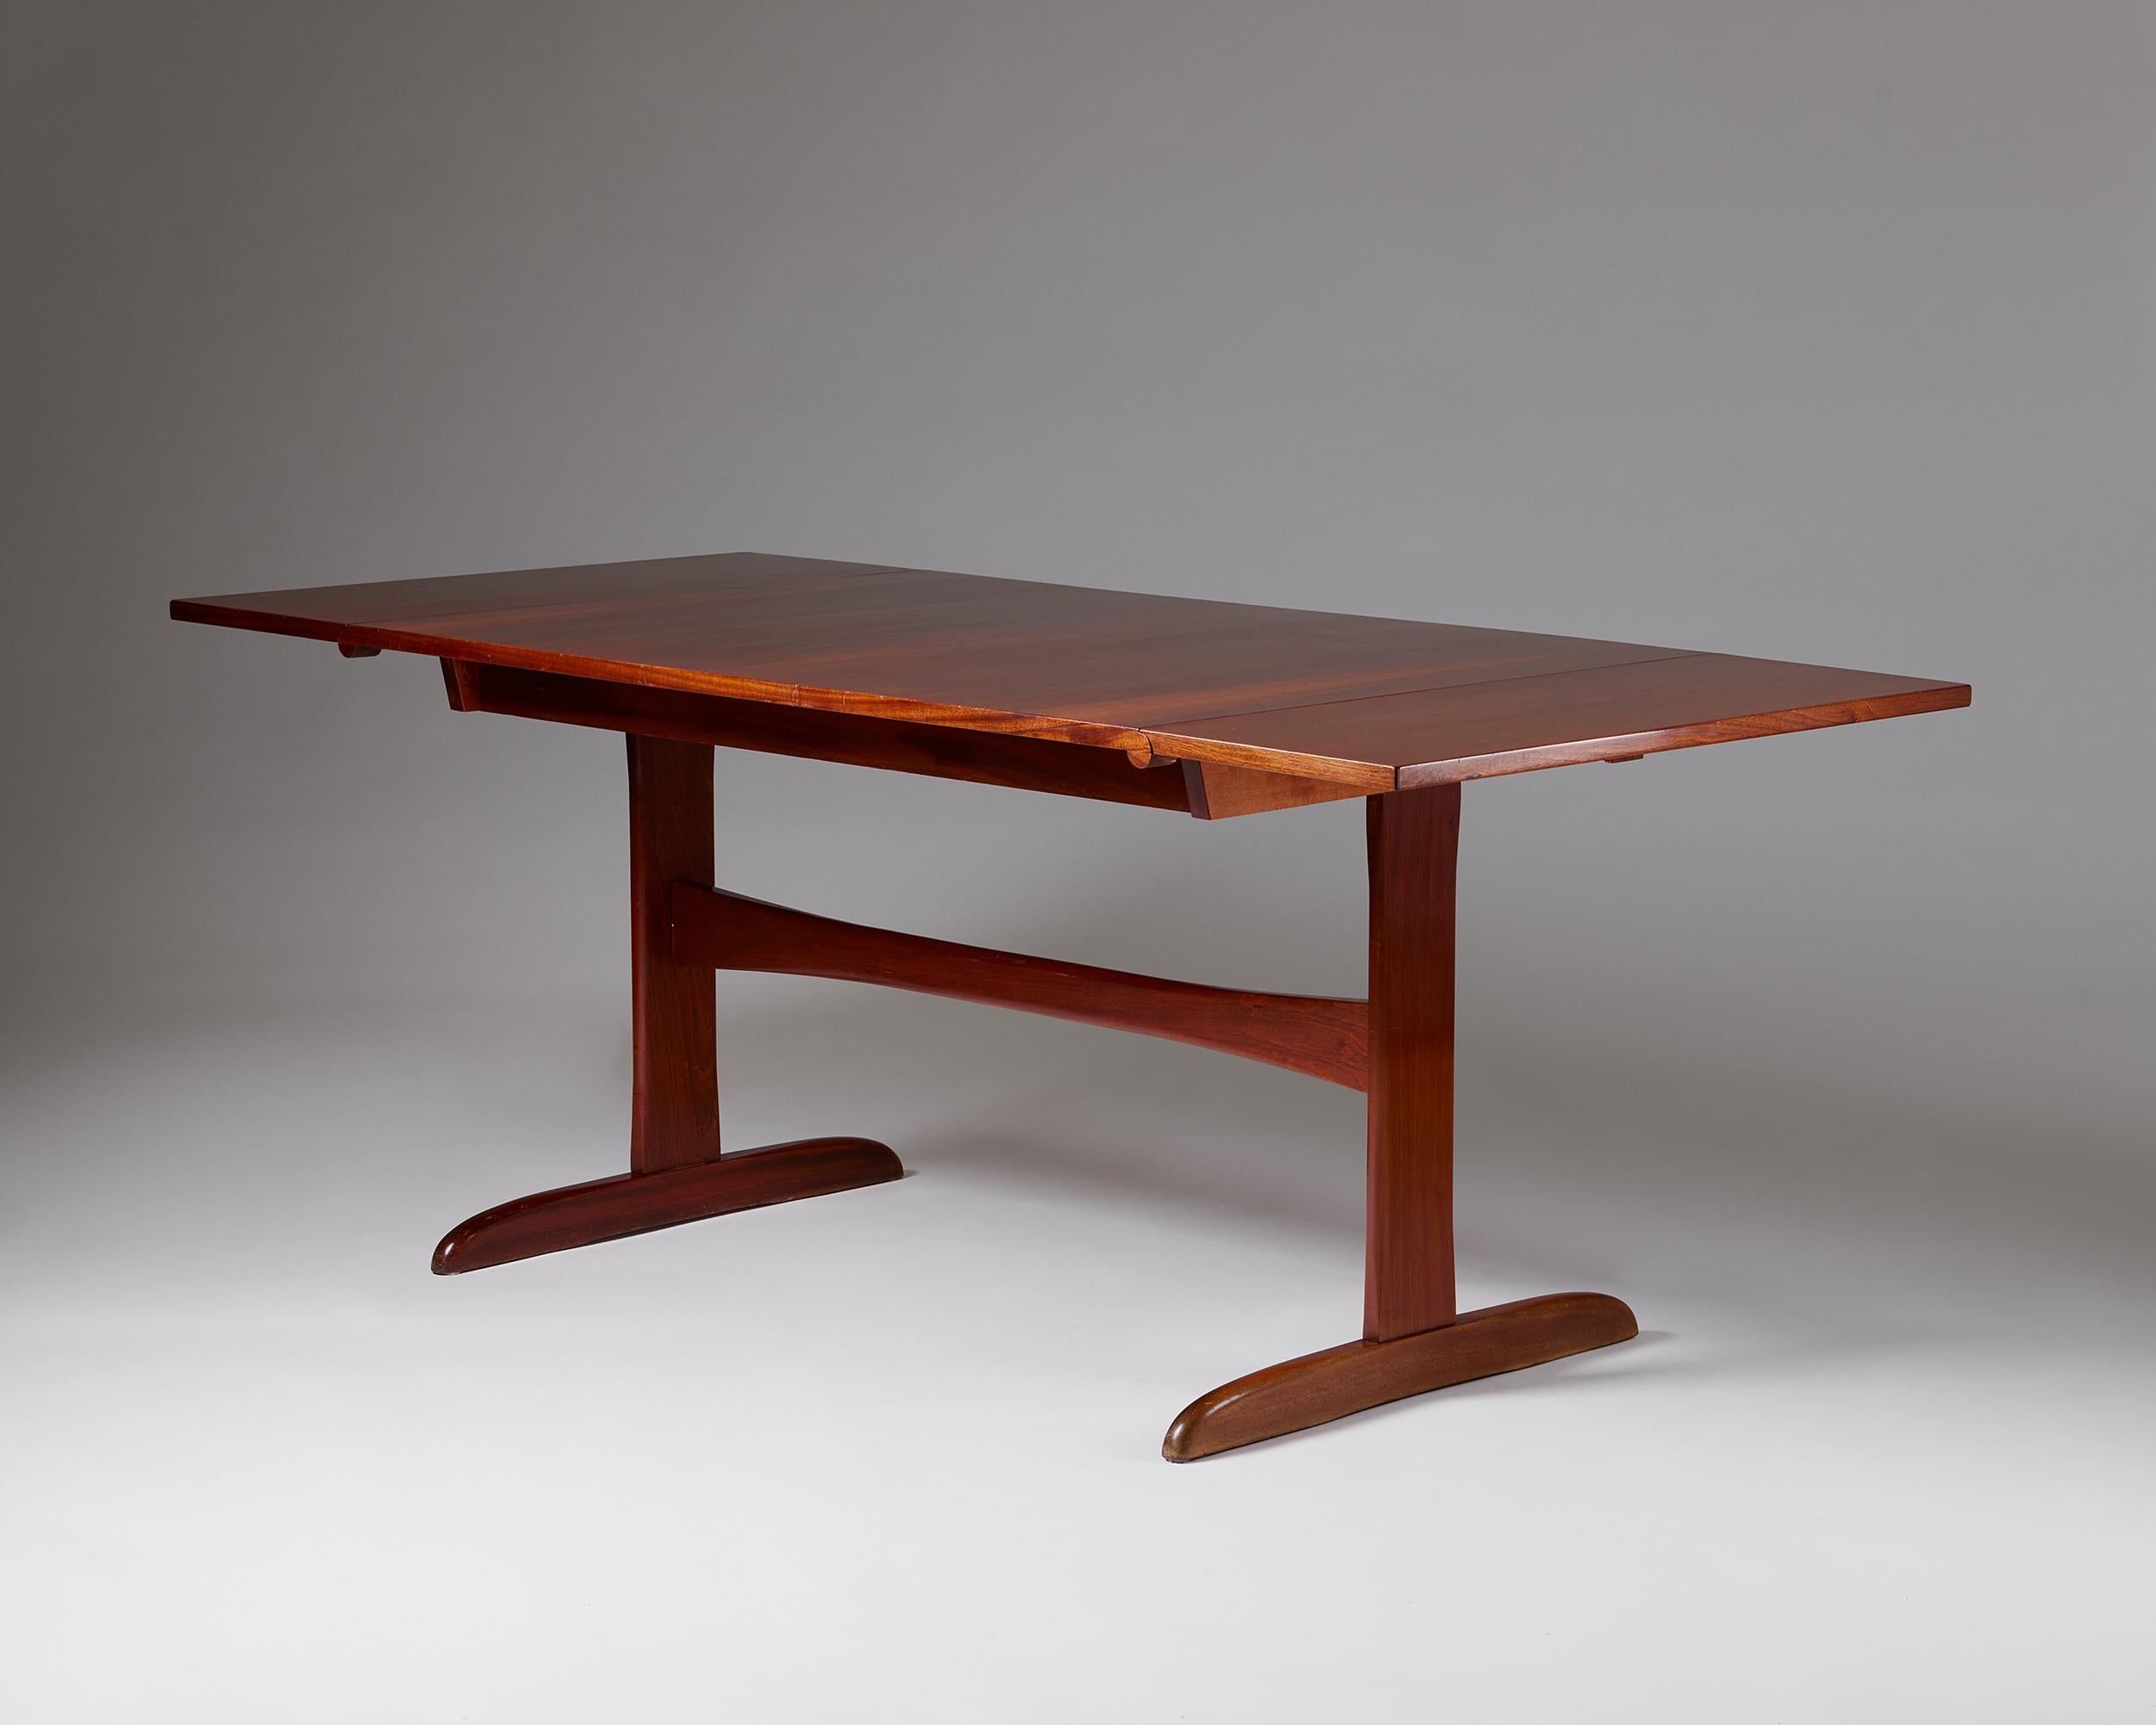 Dining table model 1197 designed by Josef Frank for Svenskt Tenn, 
Sweden, 1940s.

Mahogany.

This simple yet elegant dining table is an excellent example of how Josef Frank combined Viennese elegance with Swedish functionalism to achieve a truly